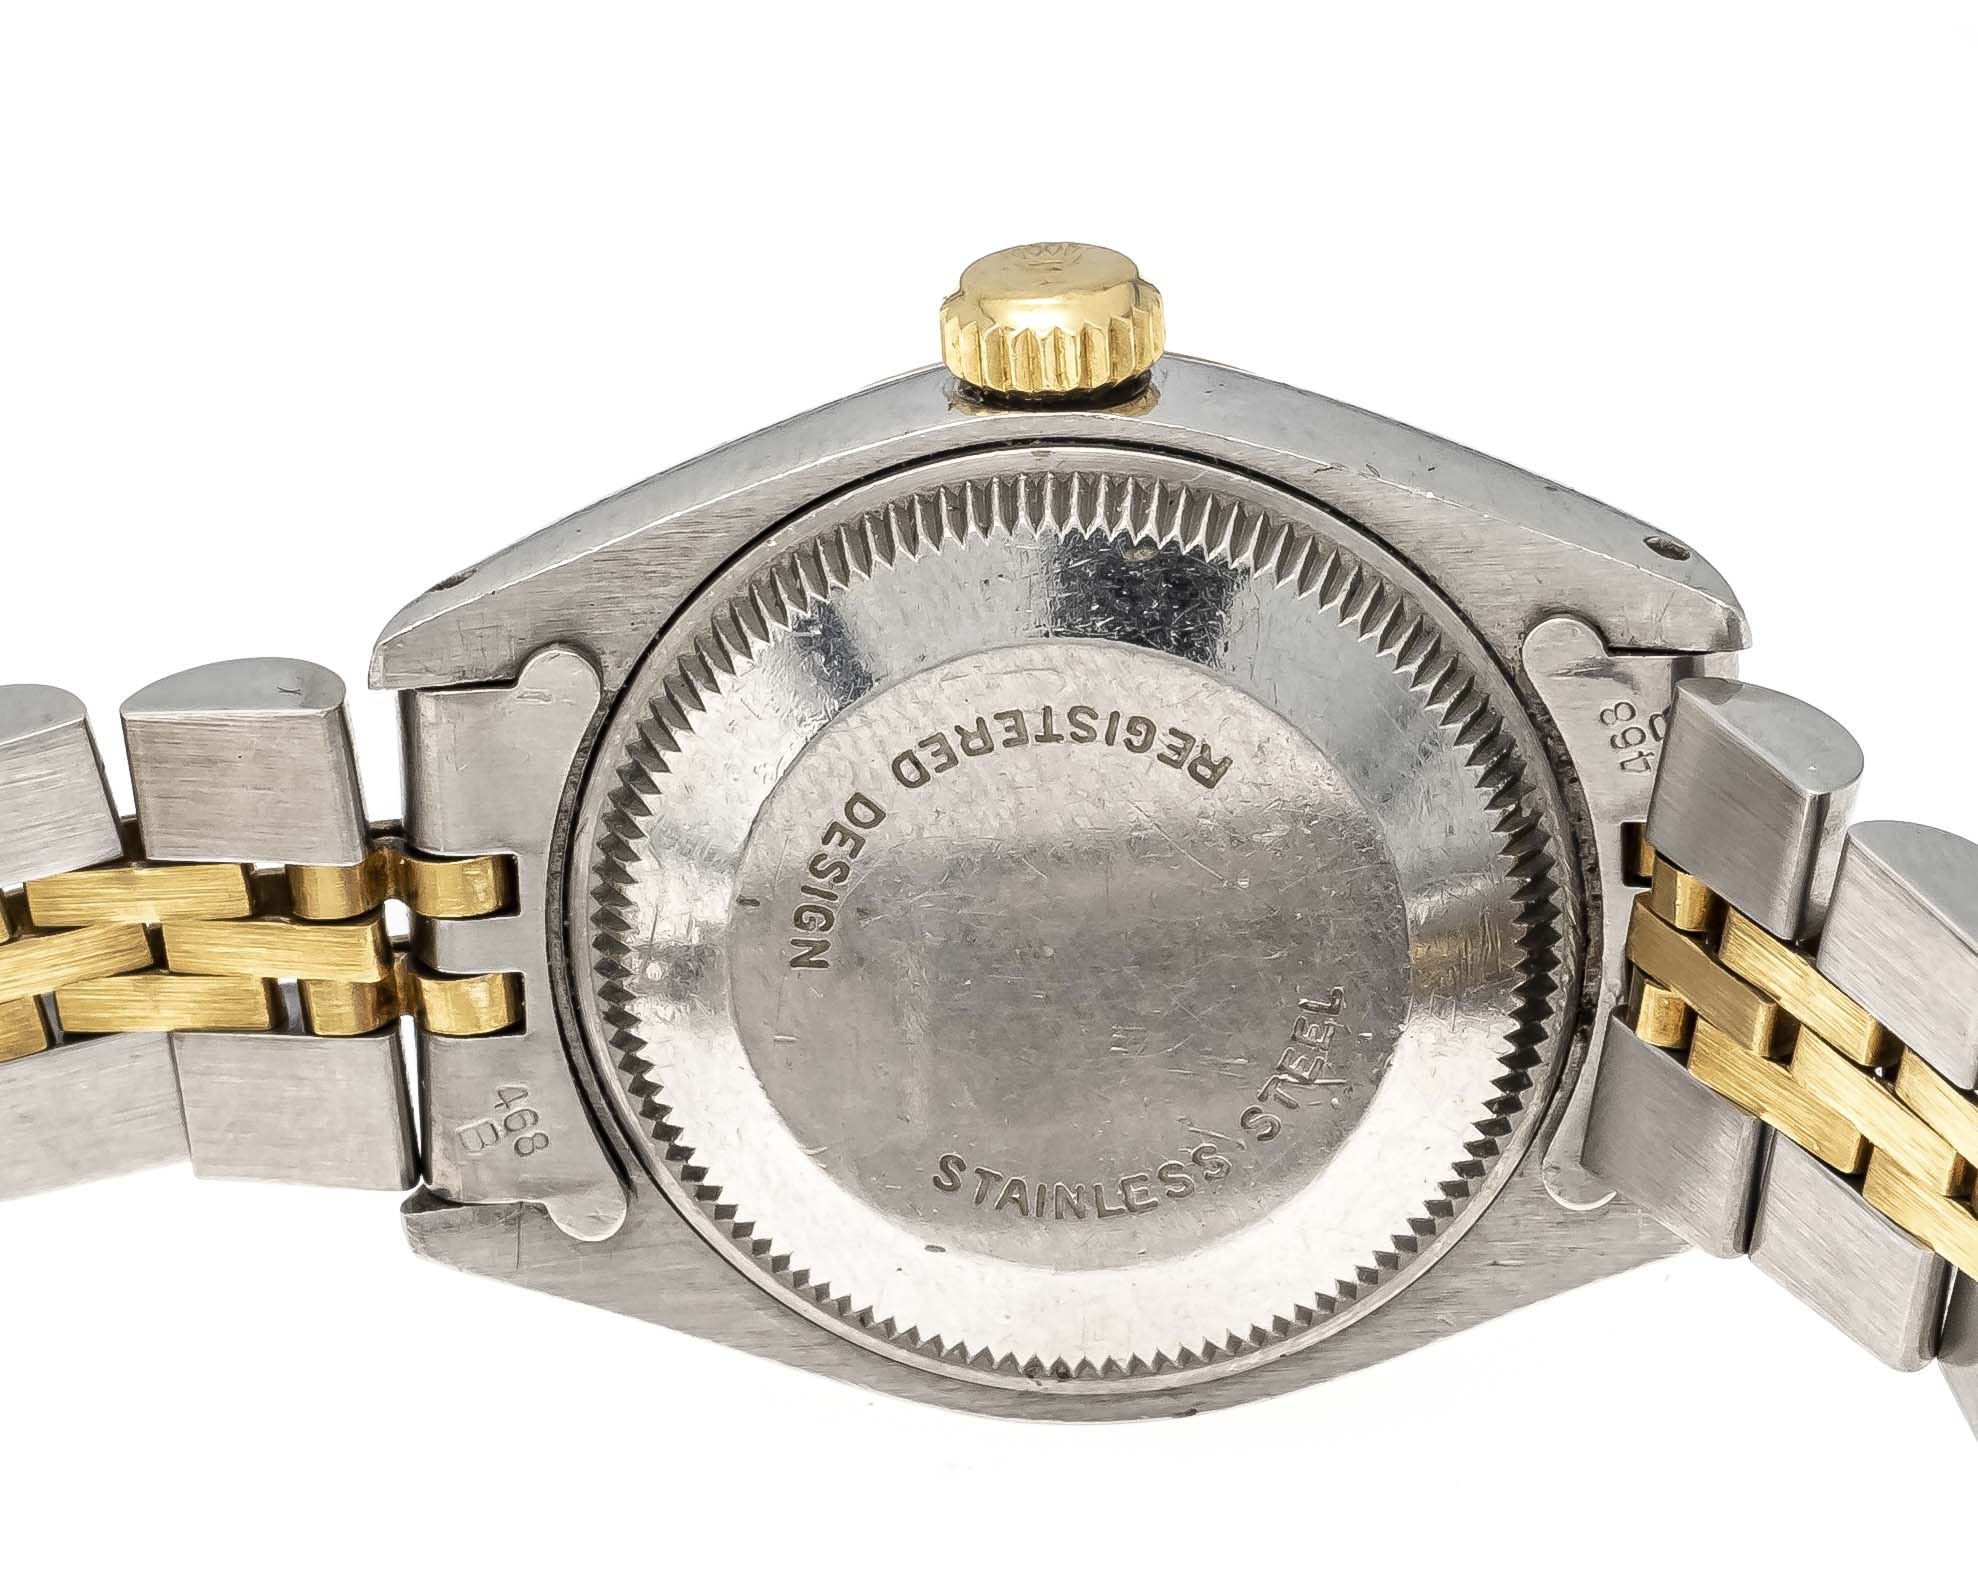 Rolex Lady Datejust, steel/gold GG 750/000, ref. 6917 circa 1980, automatic movement cal. 2030 - Image 2 of 2